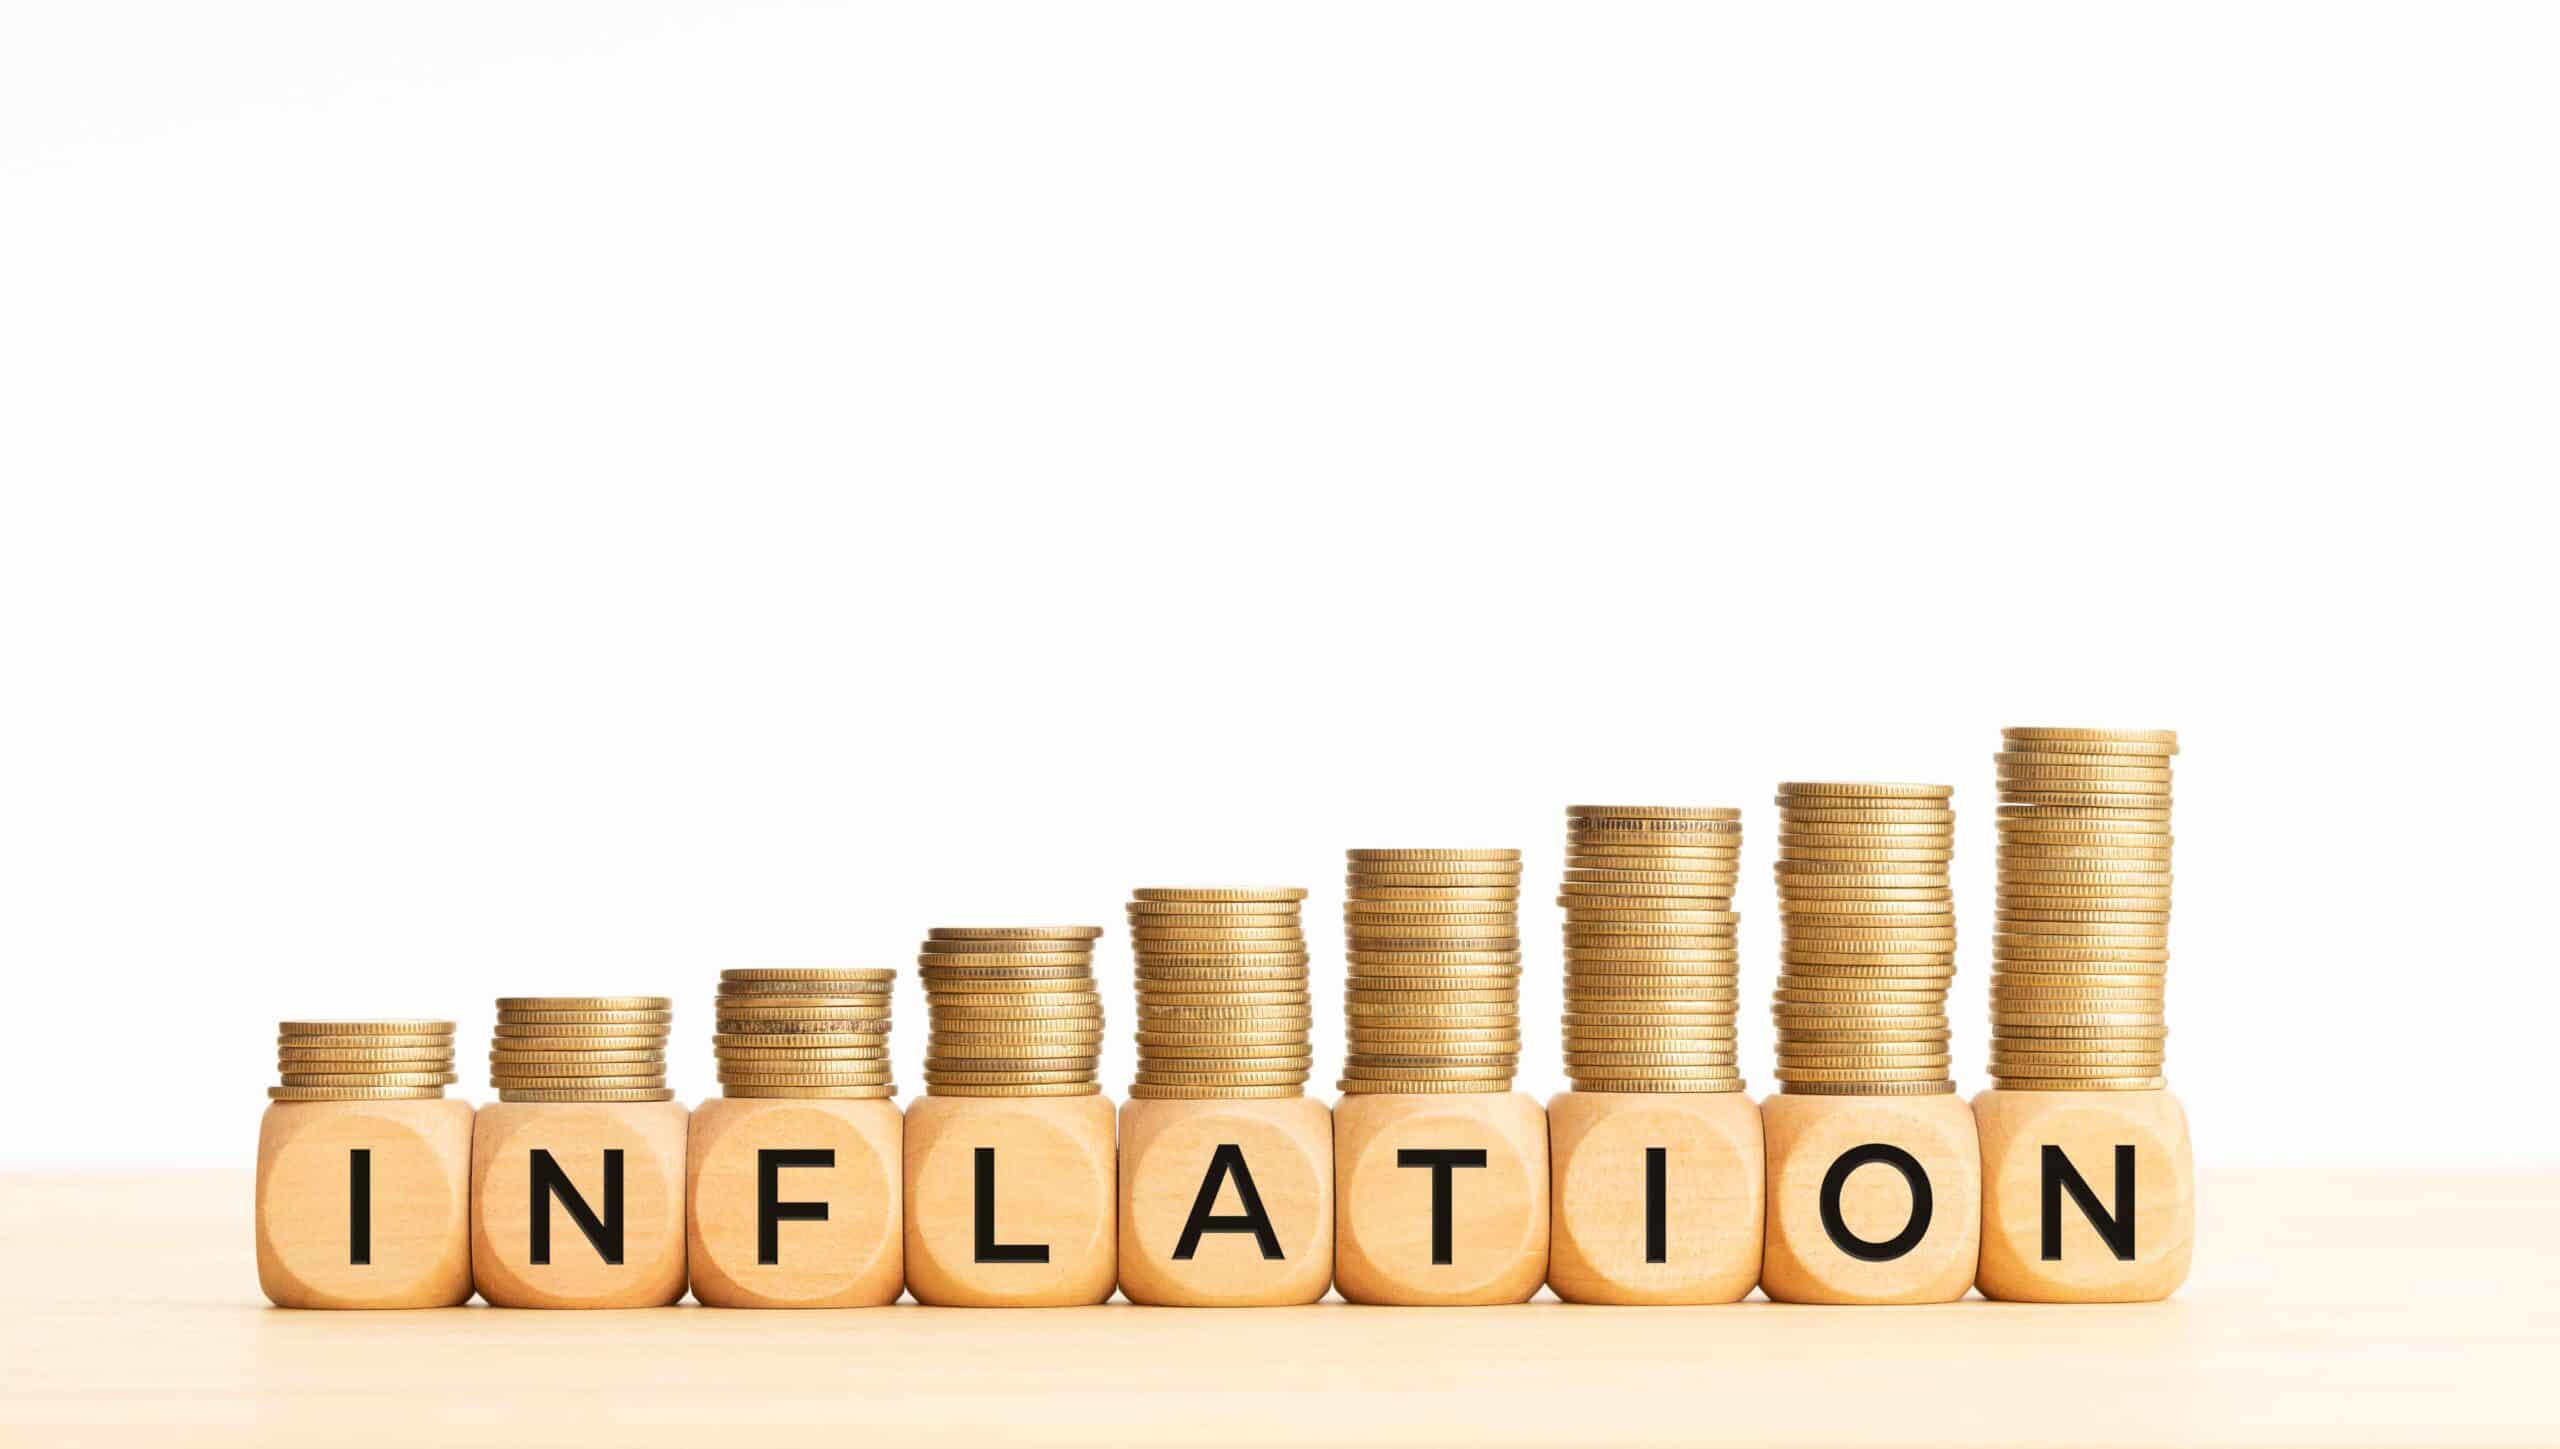 Inflation Expectations represented in an image.